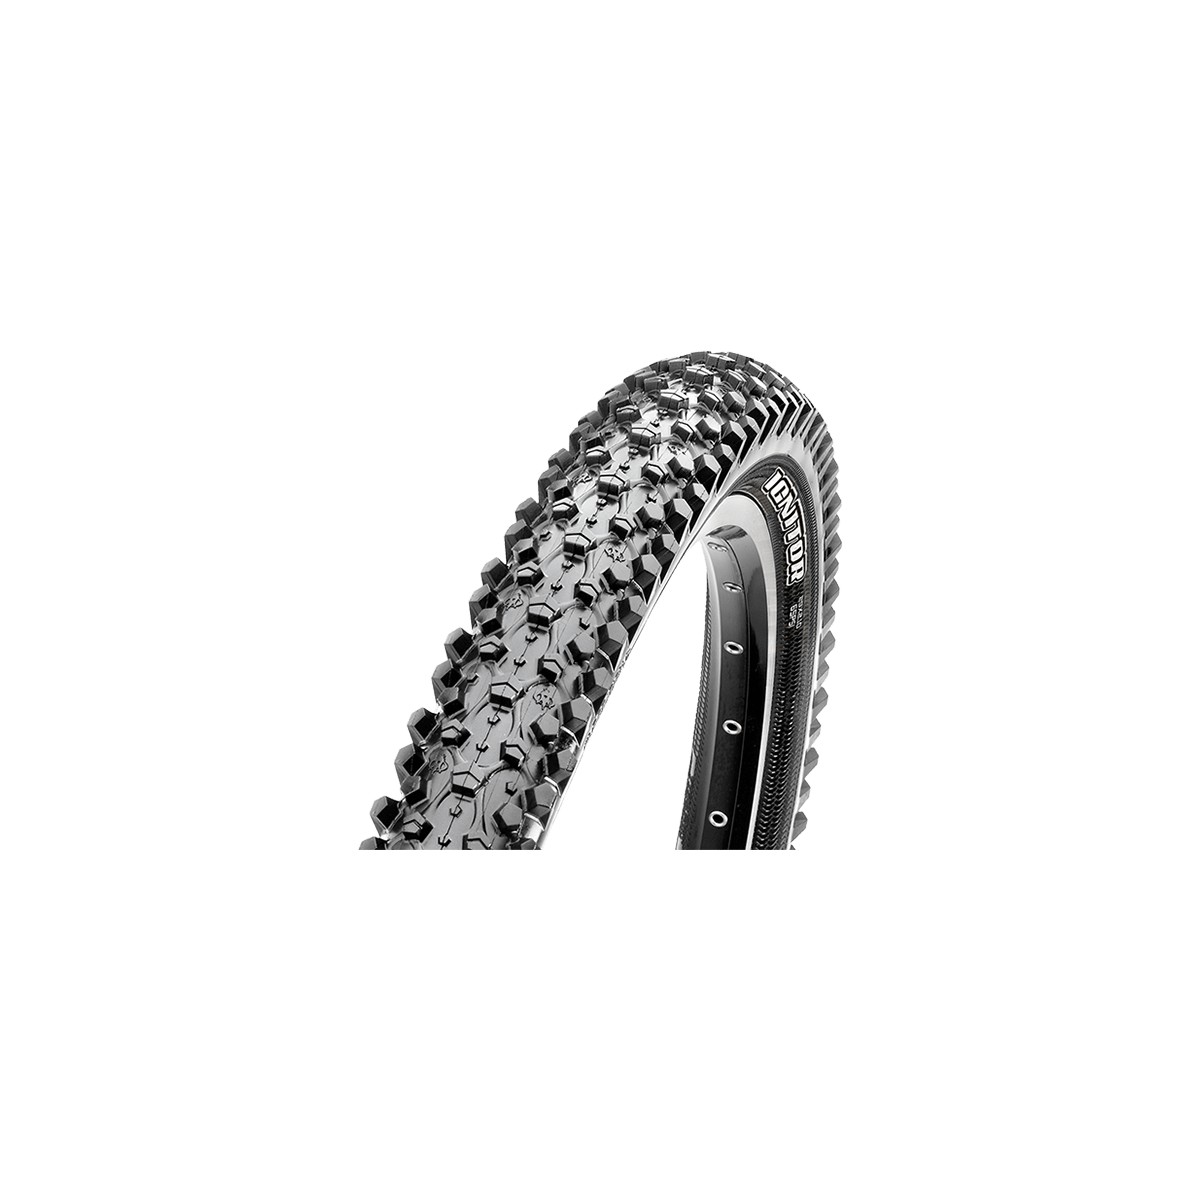 MAXXIS IGNITOR 29 * 2.10 folding tire